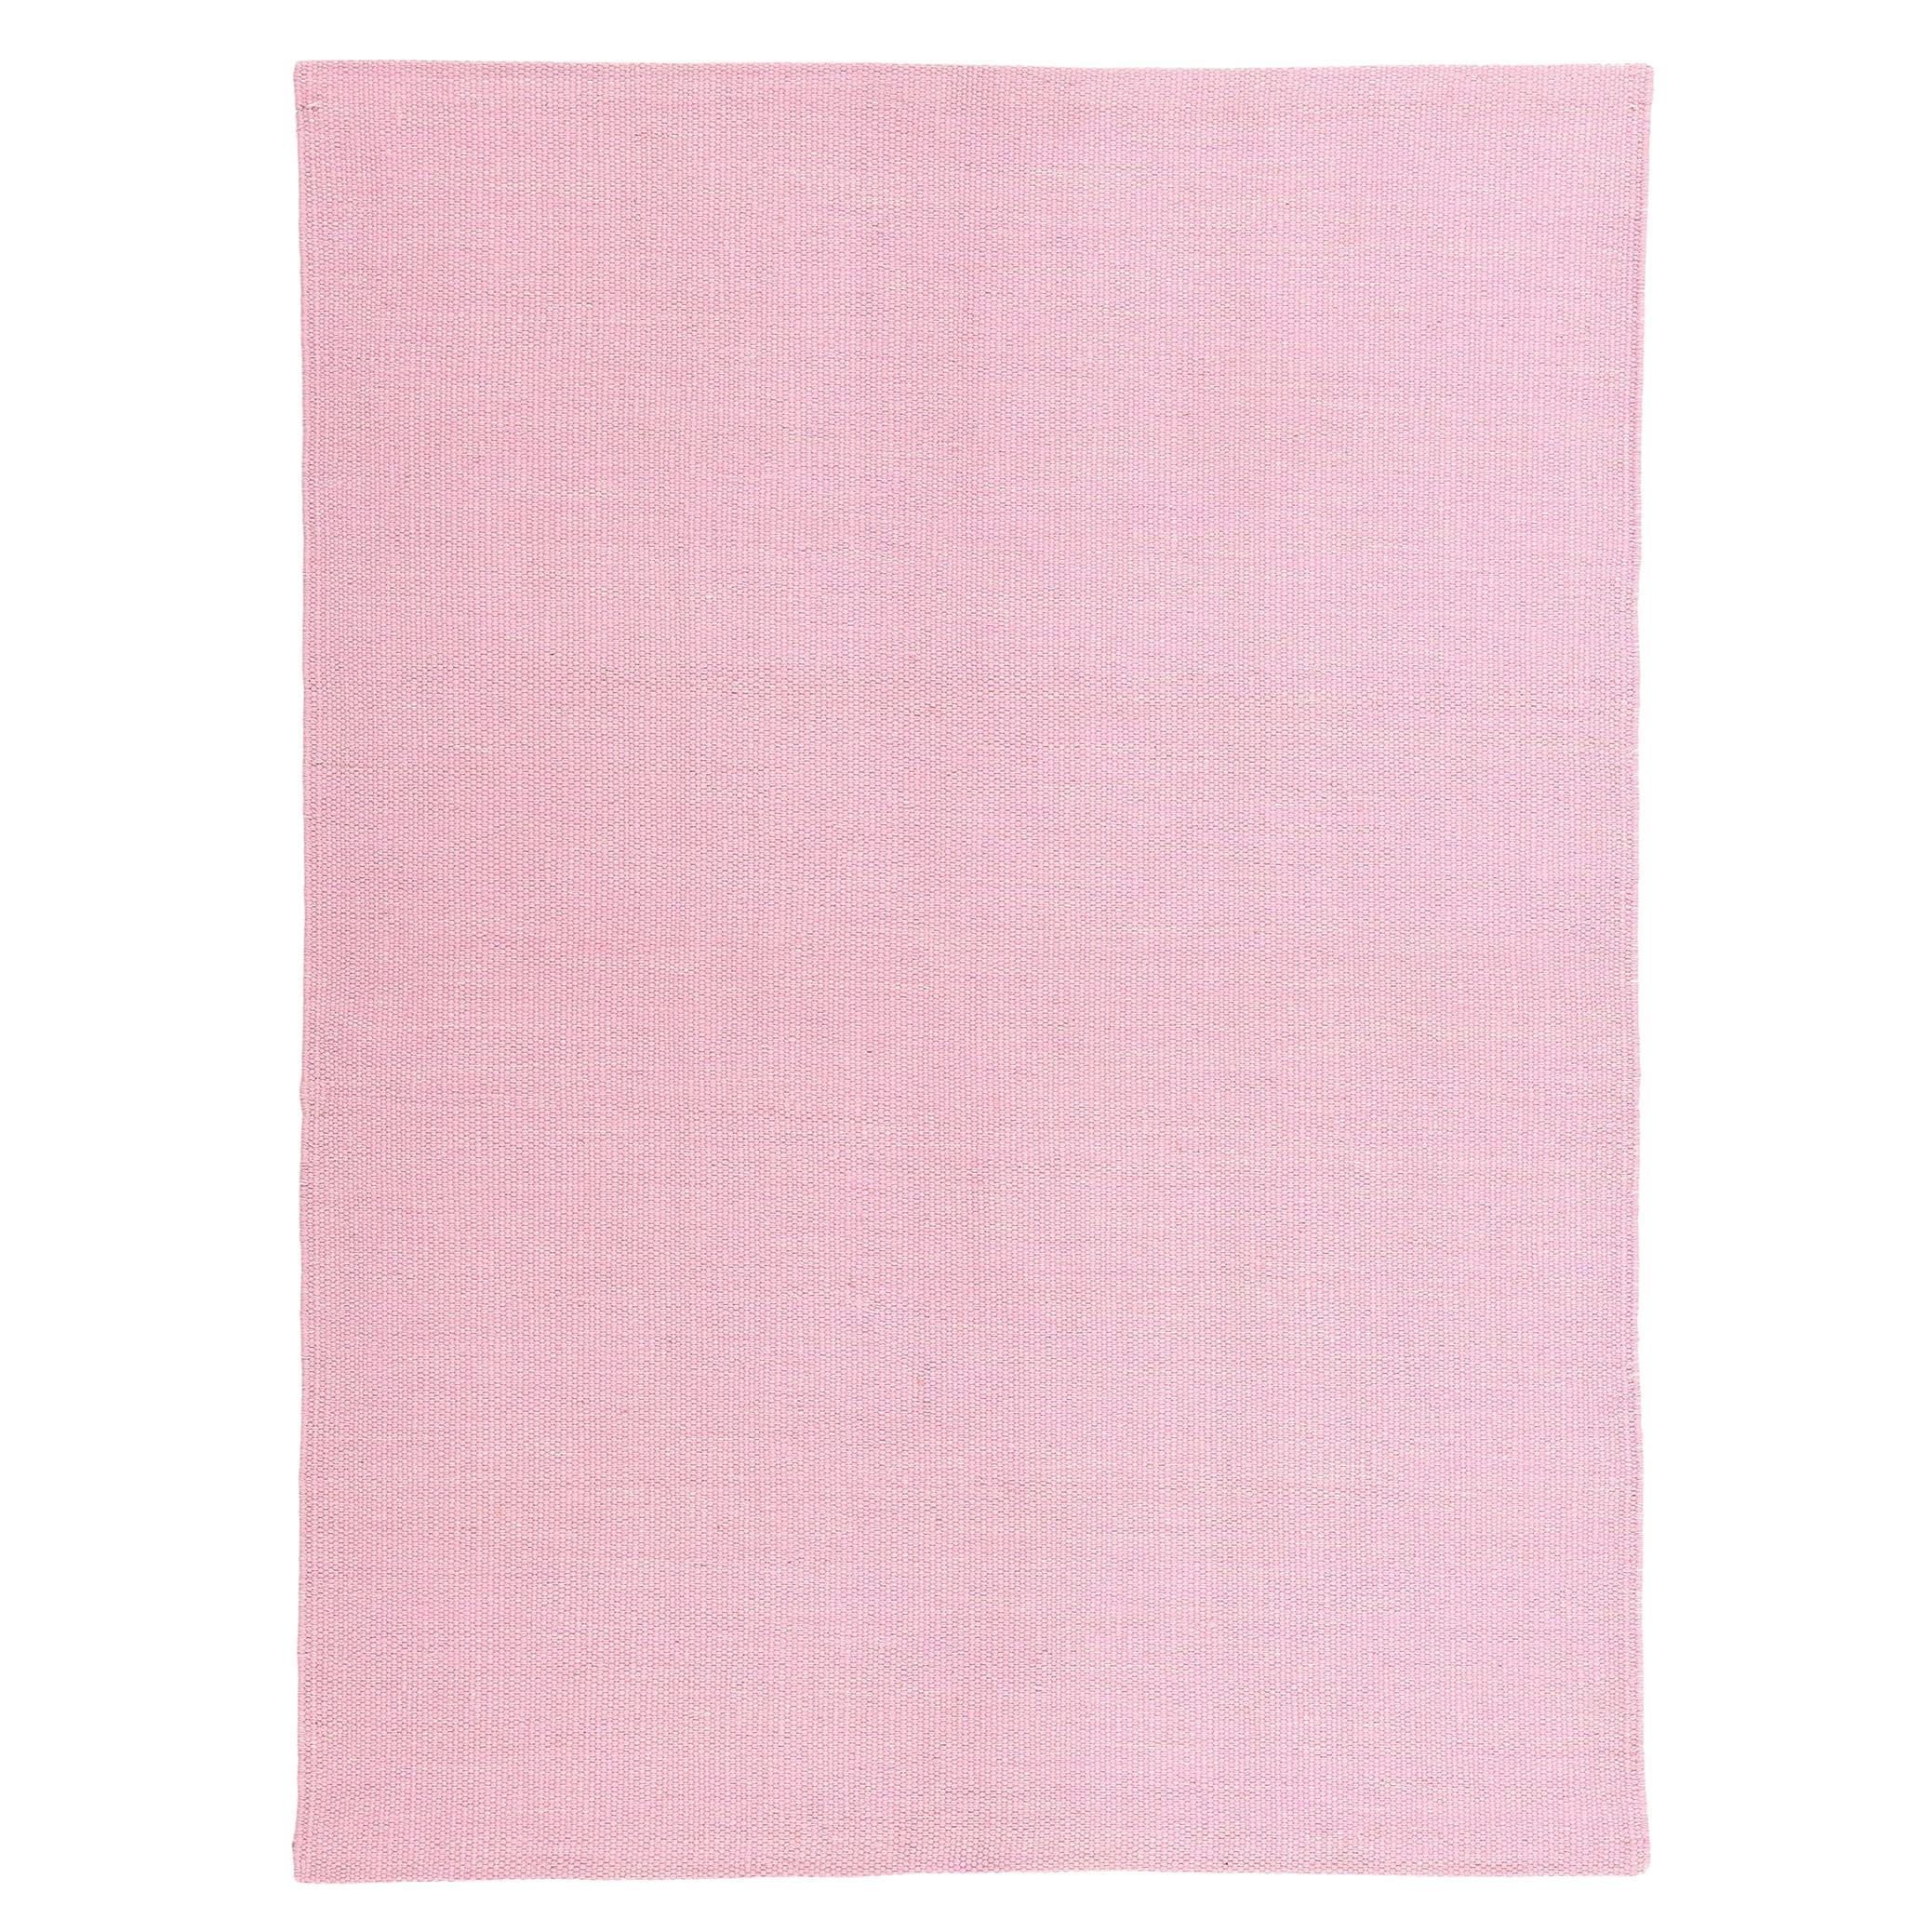 New Swedish Inspired Pink Kilim Rug with Scandinavian Modern Style For Sale